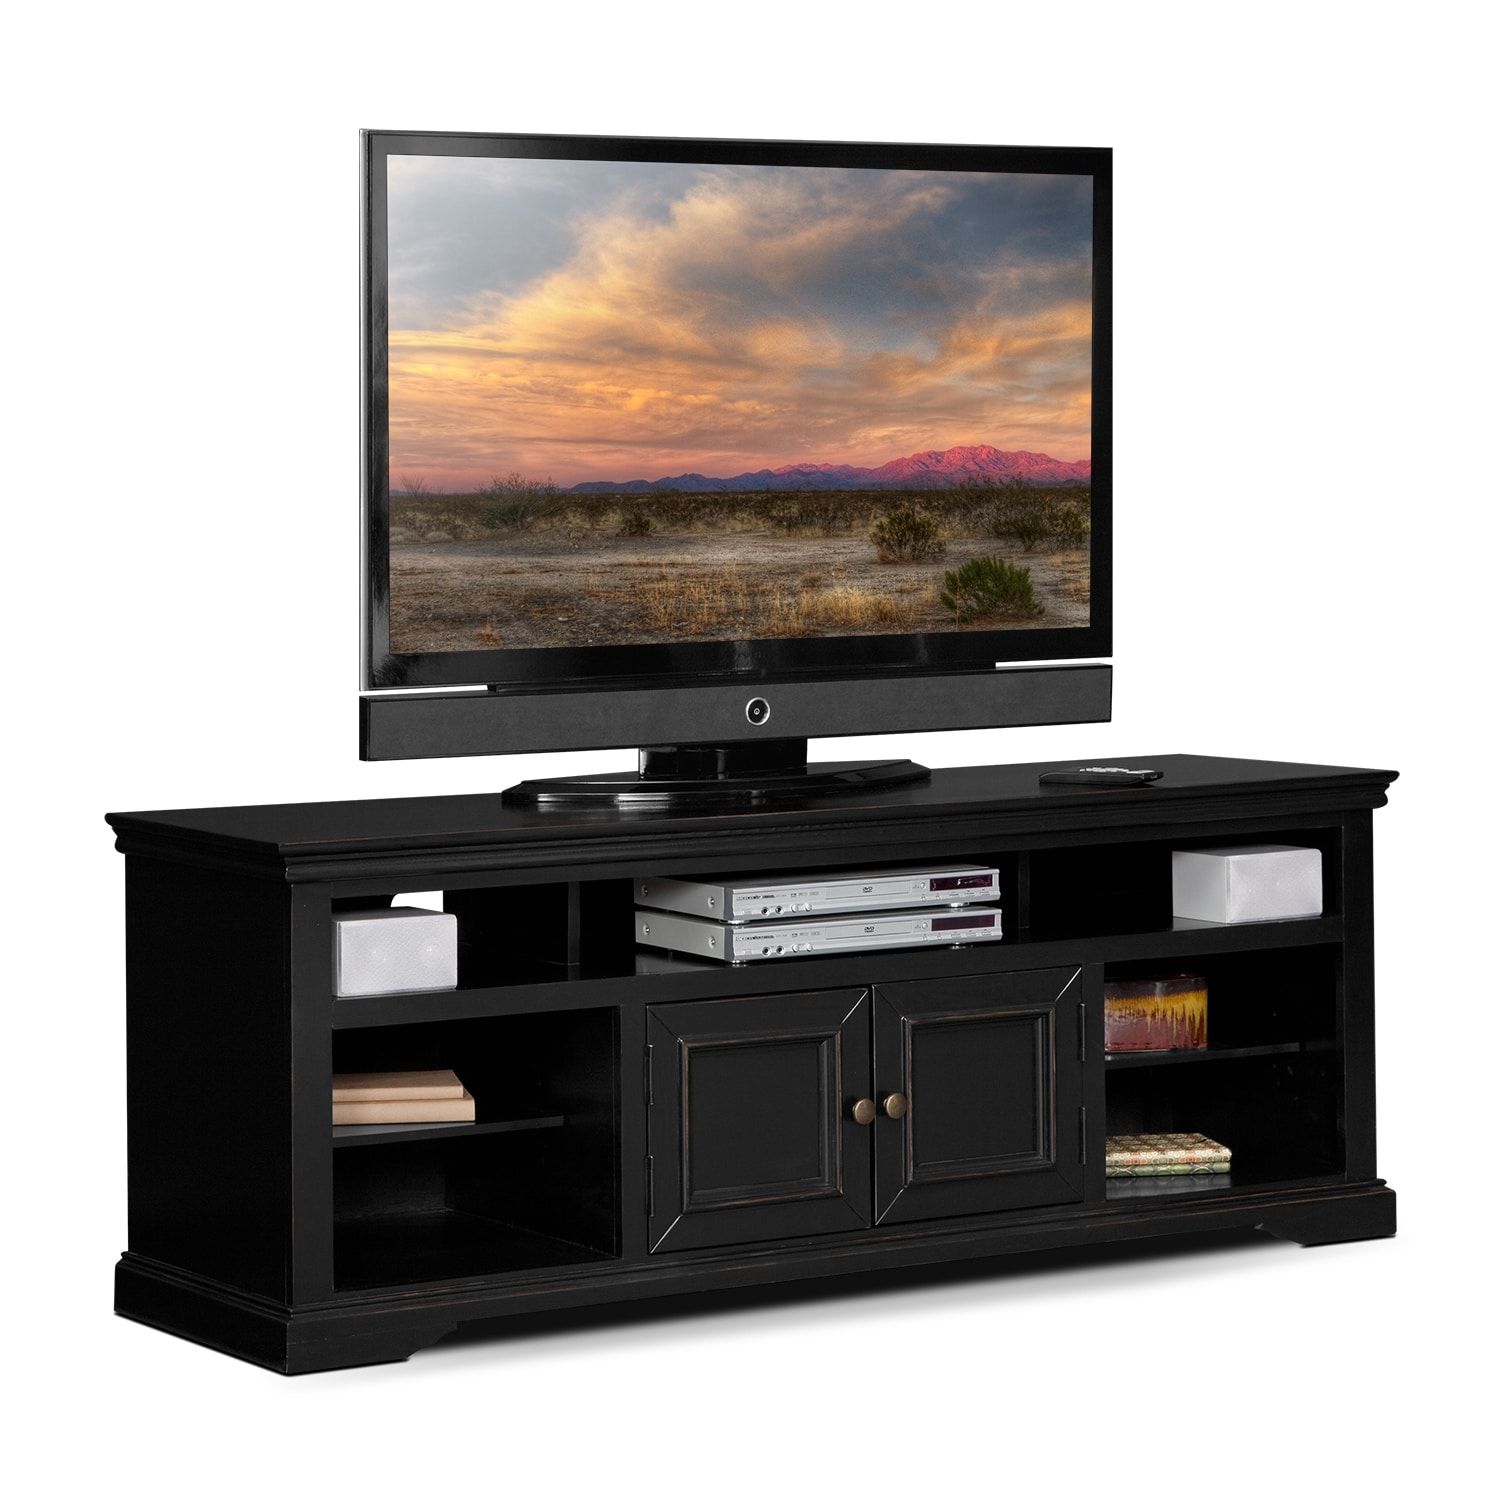 Jenson 70" Tv Stand – Black | Value City Furniture And With Regard To Mainor Tv Stands For Tvs Up To 70" (View 6 of 15)